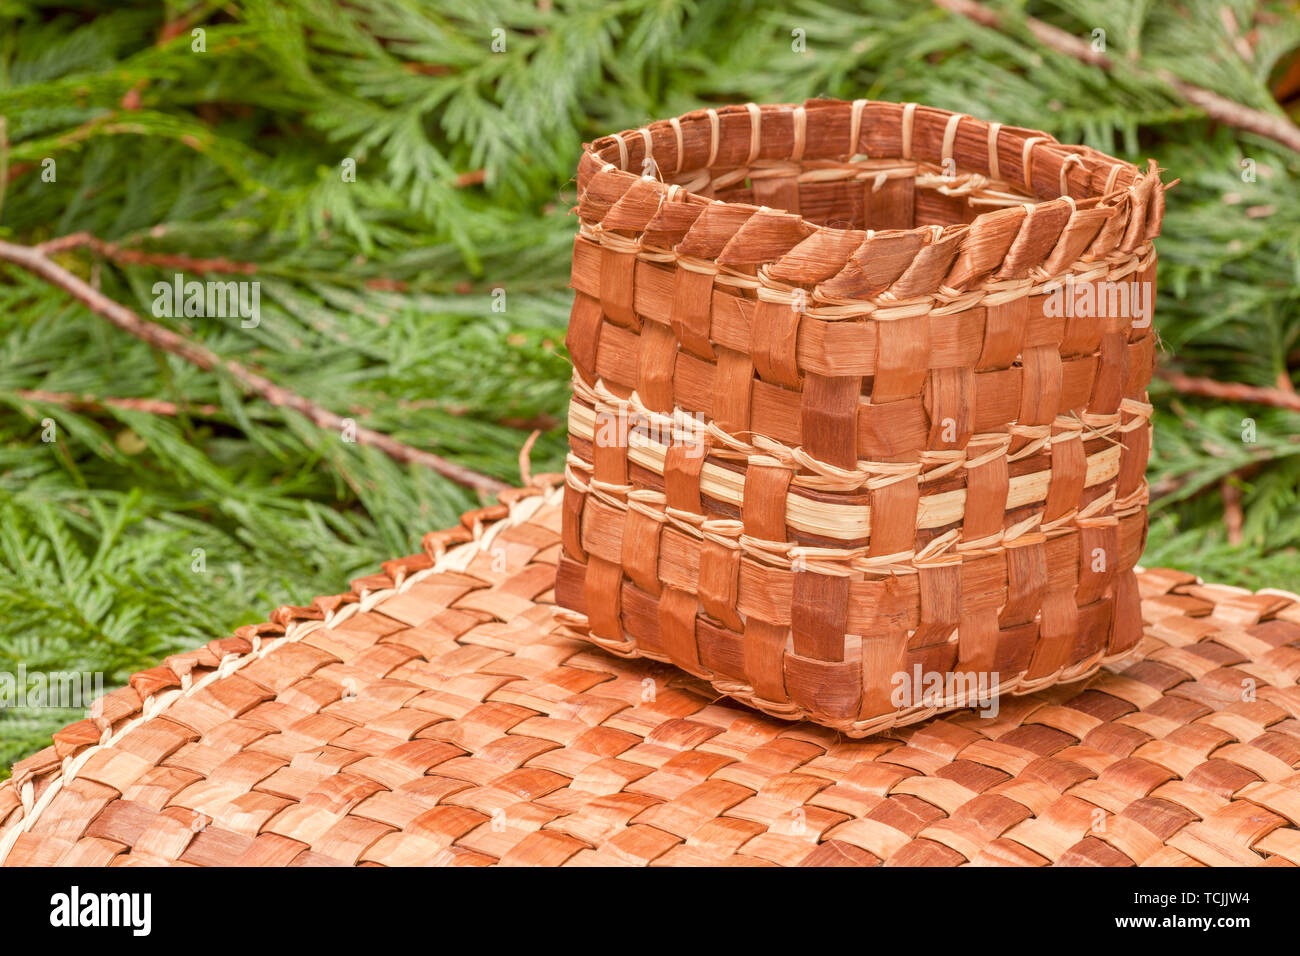 Hand-woven mat and basket made from the pliant inner bark of a Western Red Cedar tree, resting on Western Red Cedar branchlets. Stock Photo